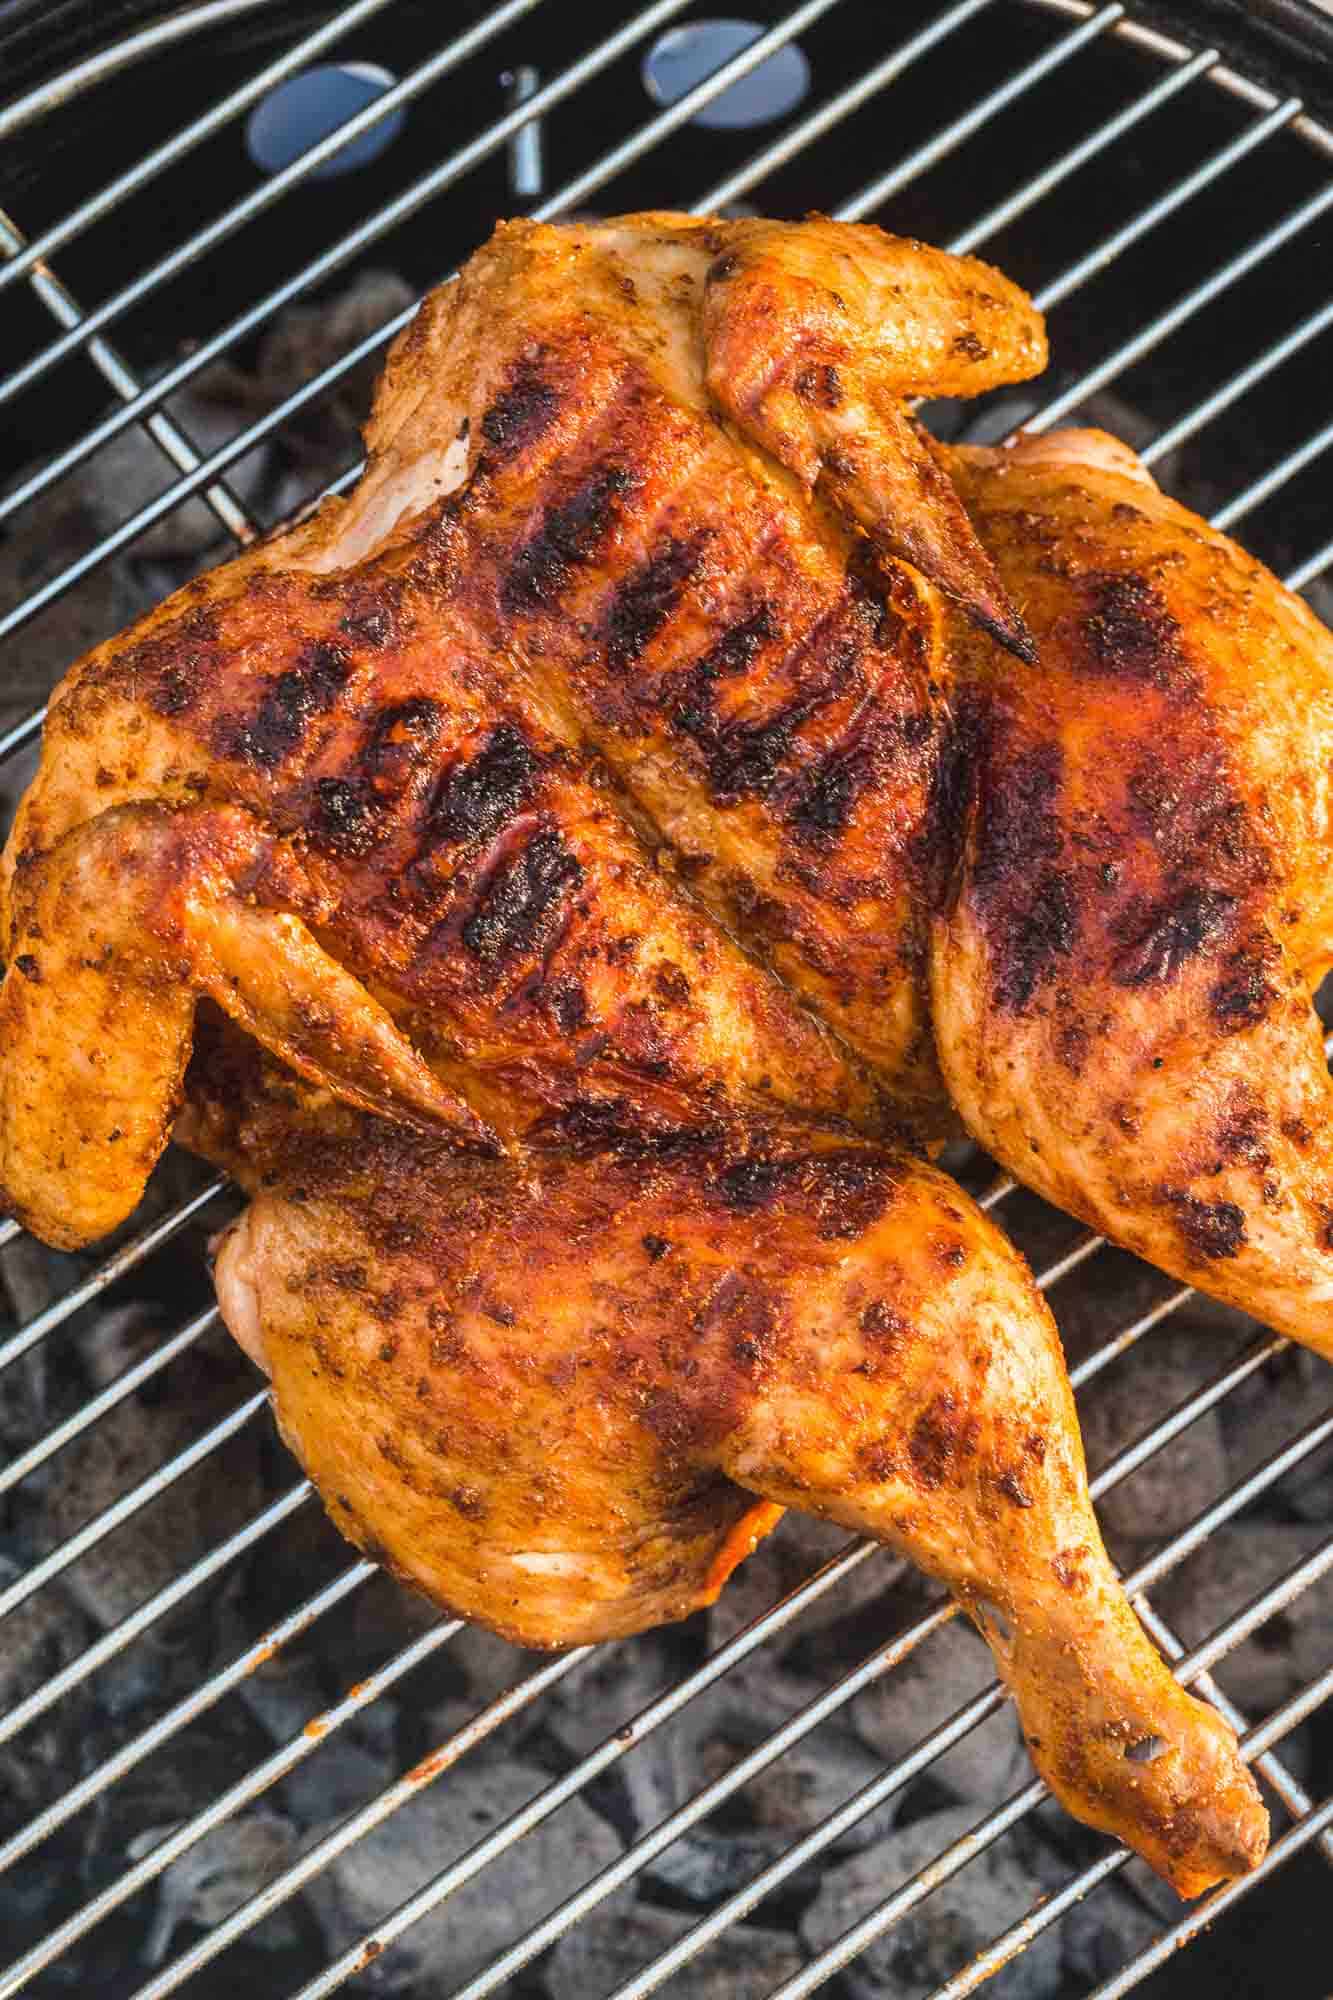 Spatchcocked grilled chicken placed on a coal grill